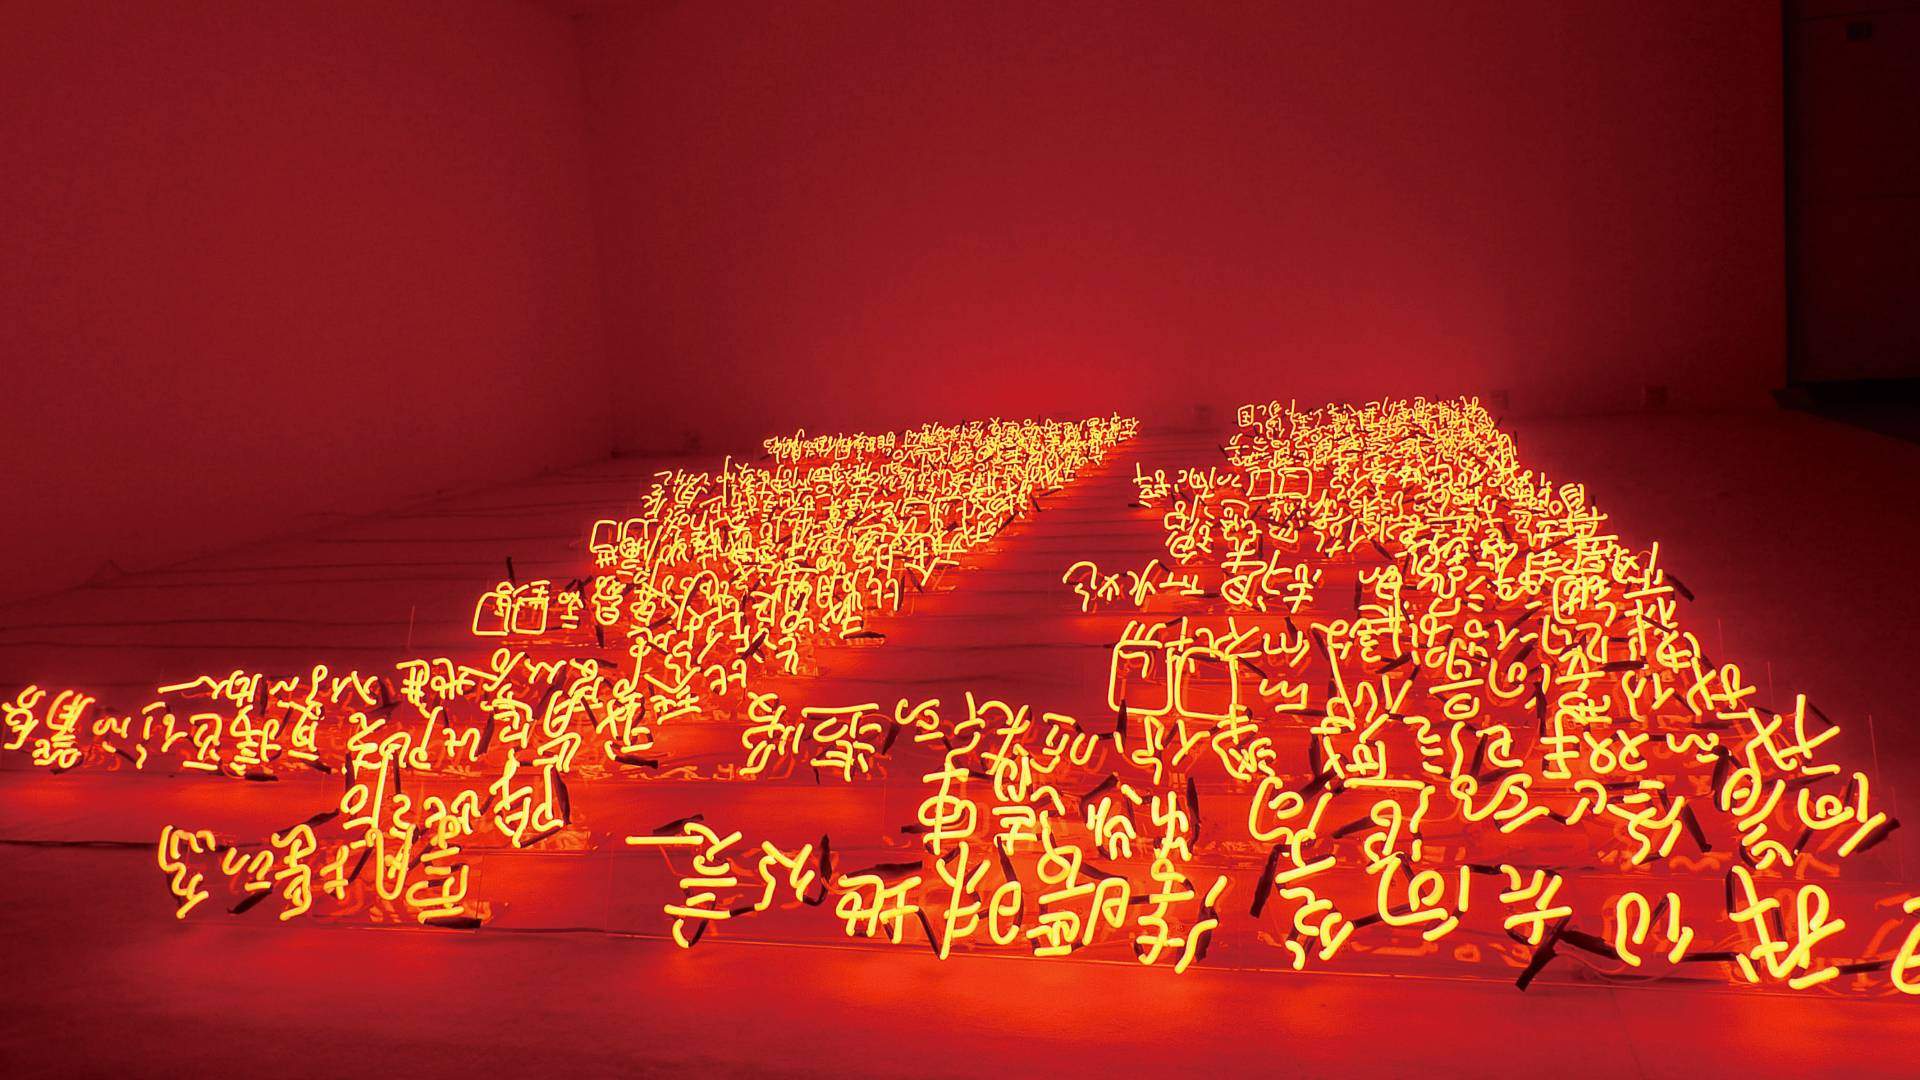 A New Immersive and Neon-Lit Exhibition of Contemporary Chinese Art Is Coming to the NGV